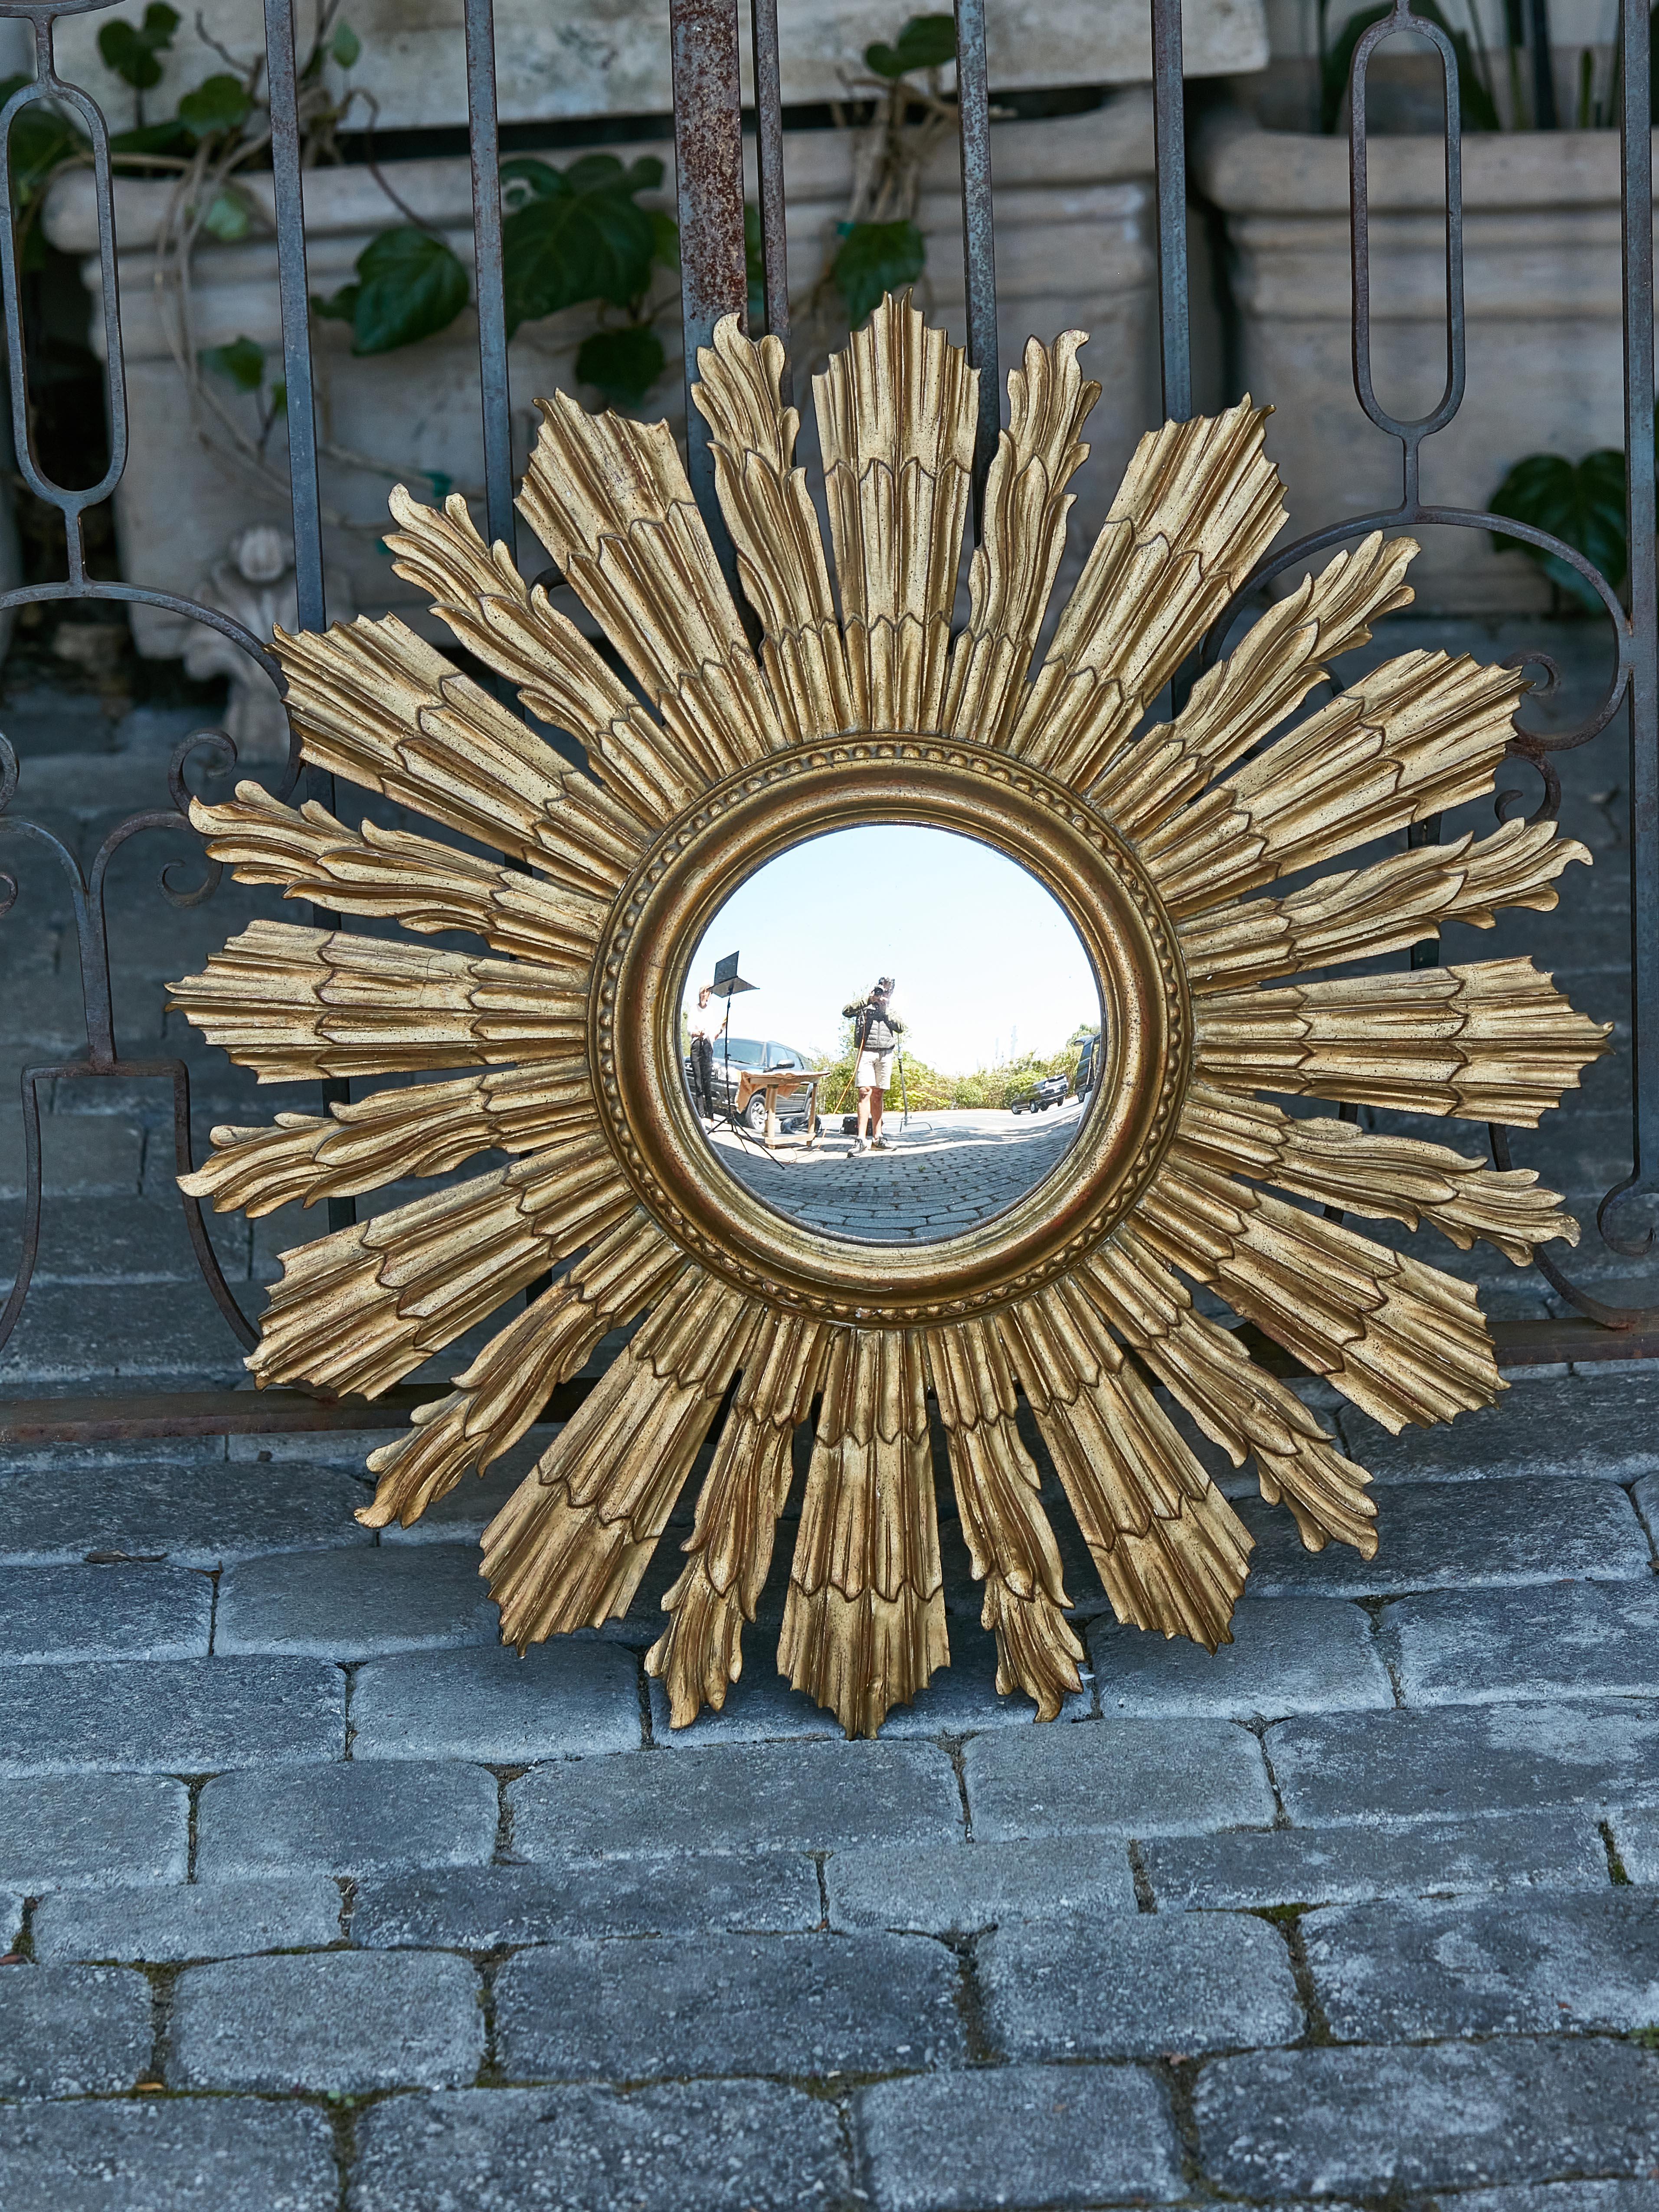 A French giltwood sunburst mirror from the Midcentury period with convex mirror plate surrounded by petite carved beads and sun rays lon two levels alternating straight and wavy lines. Bathing your space in a golden aura, this French giltwood